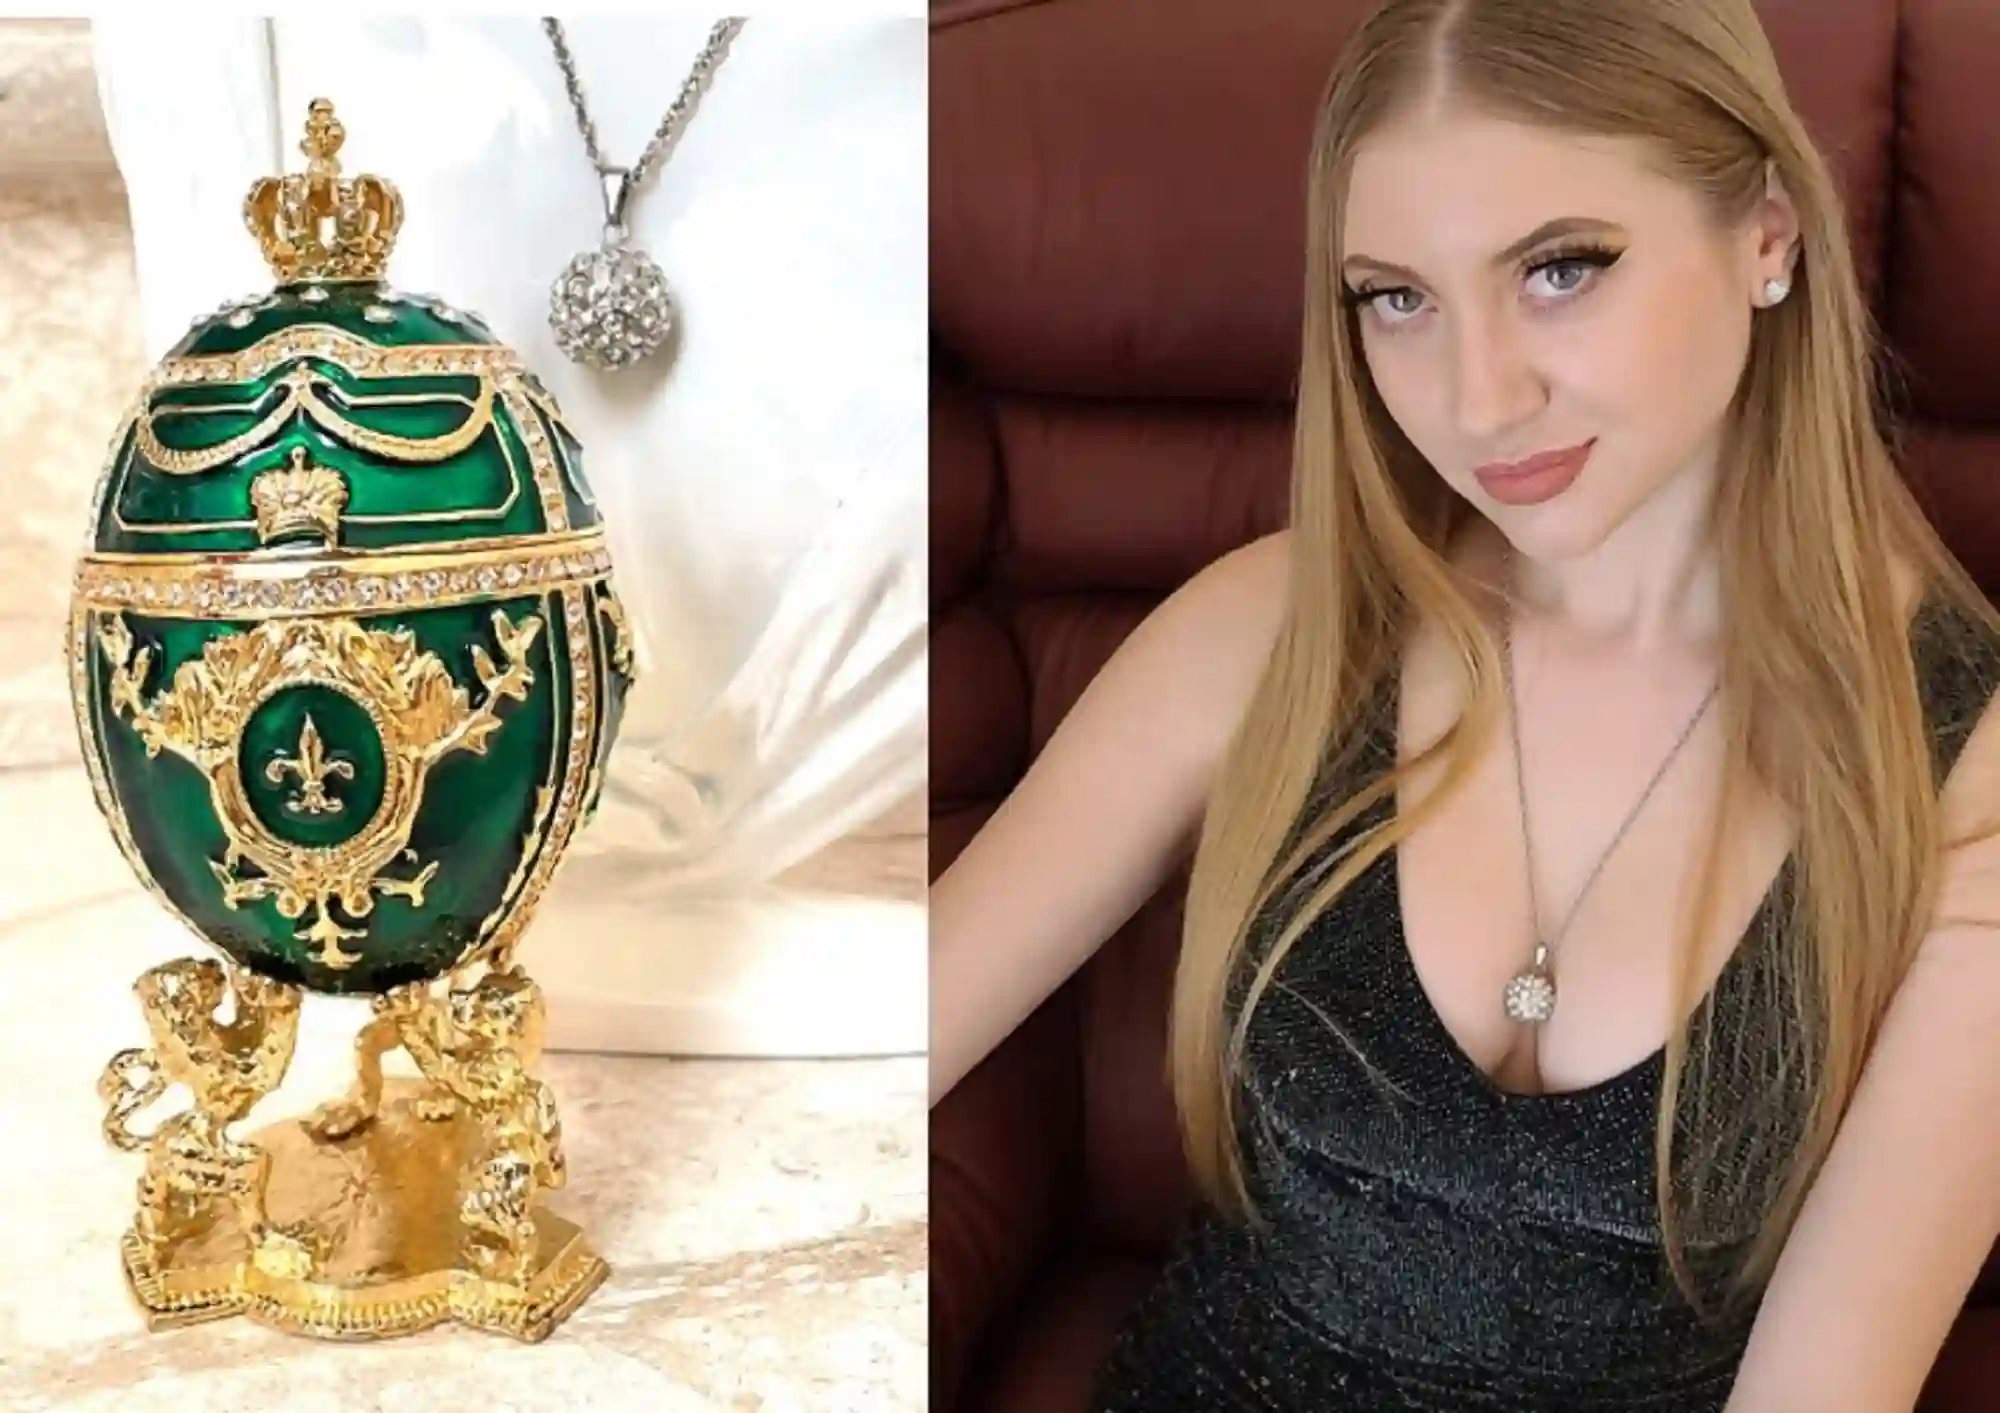 Stunning Faberge Egg Green Handmade Gift for her - Home Decor Gift for women - Faberge Egg Trinket Faberge egg Unique Jewelry Box Bday Gifts 